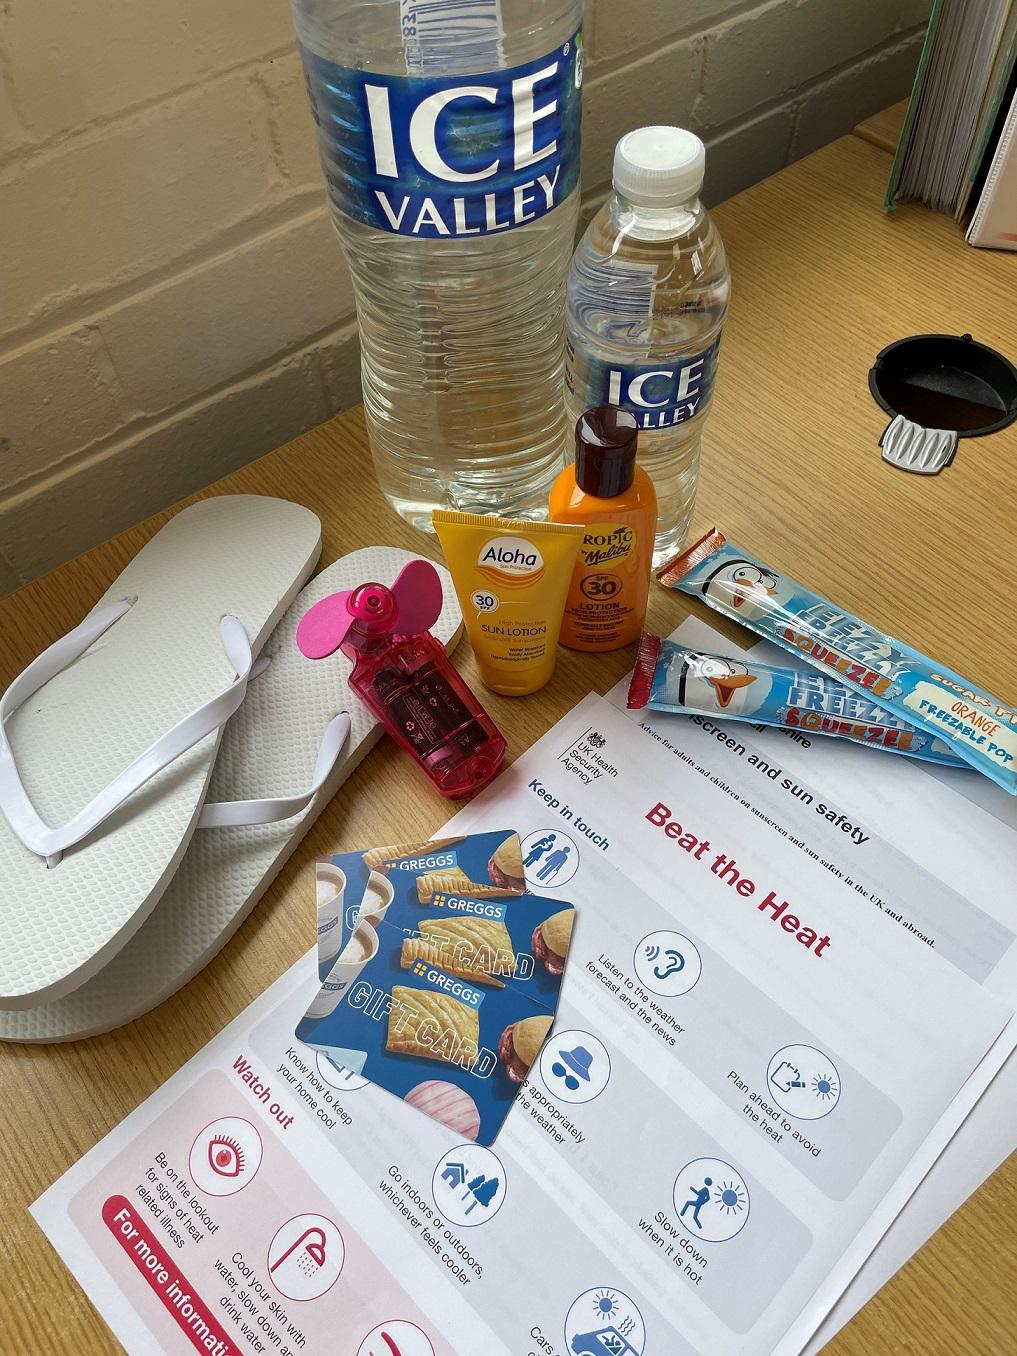 Healthpack contains icepops, water, hand held fan, flip flops, sun cream, Greggs gift card and health advice